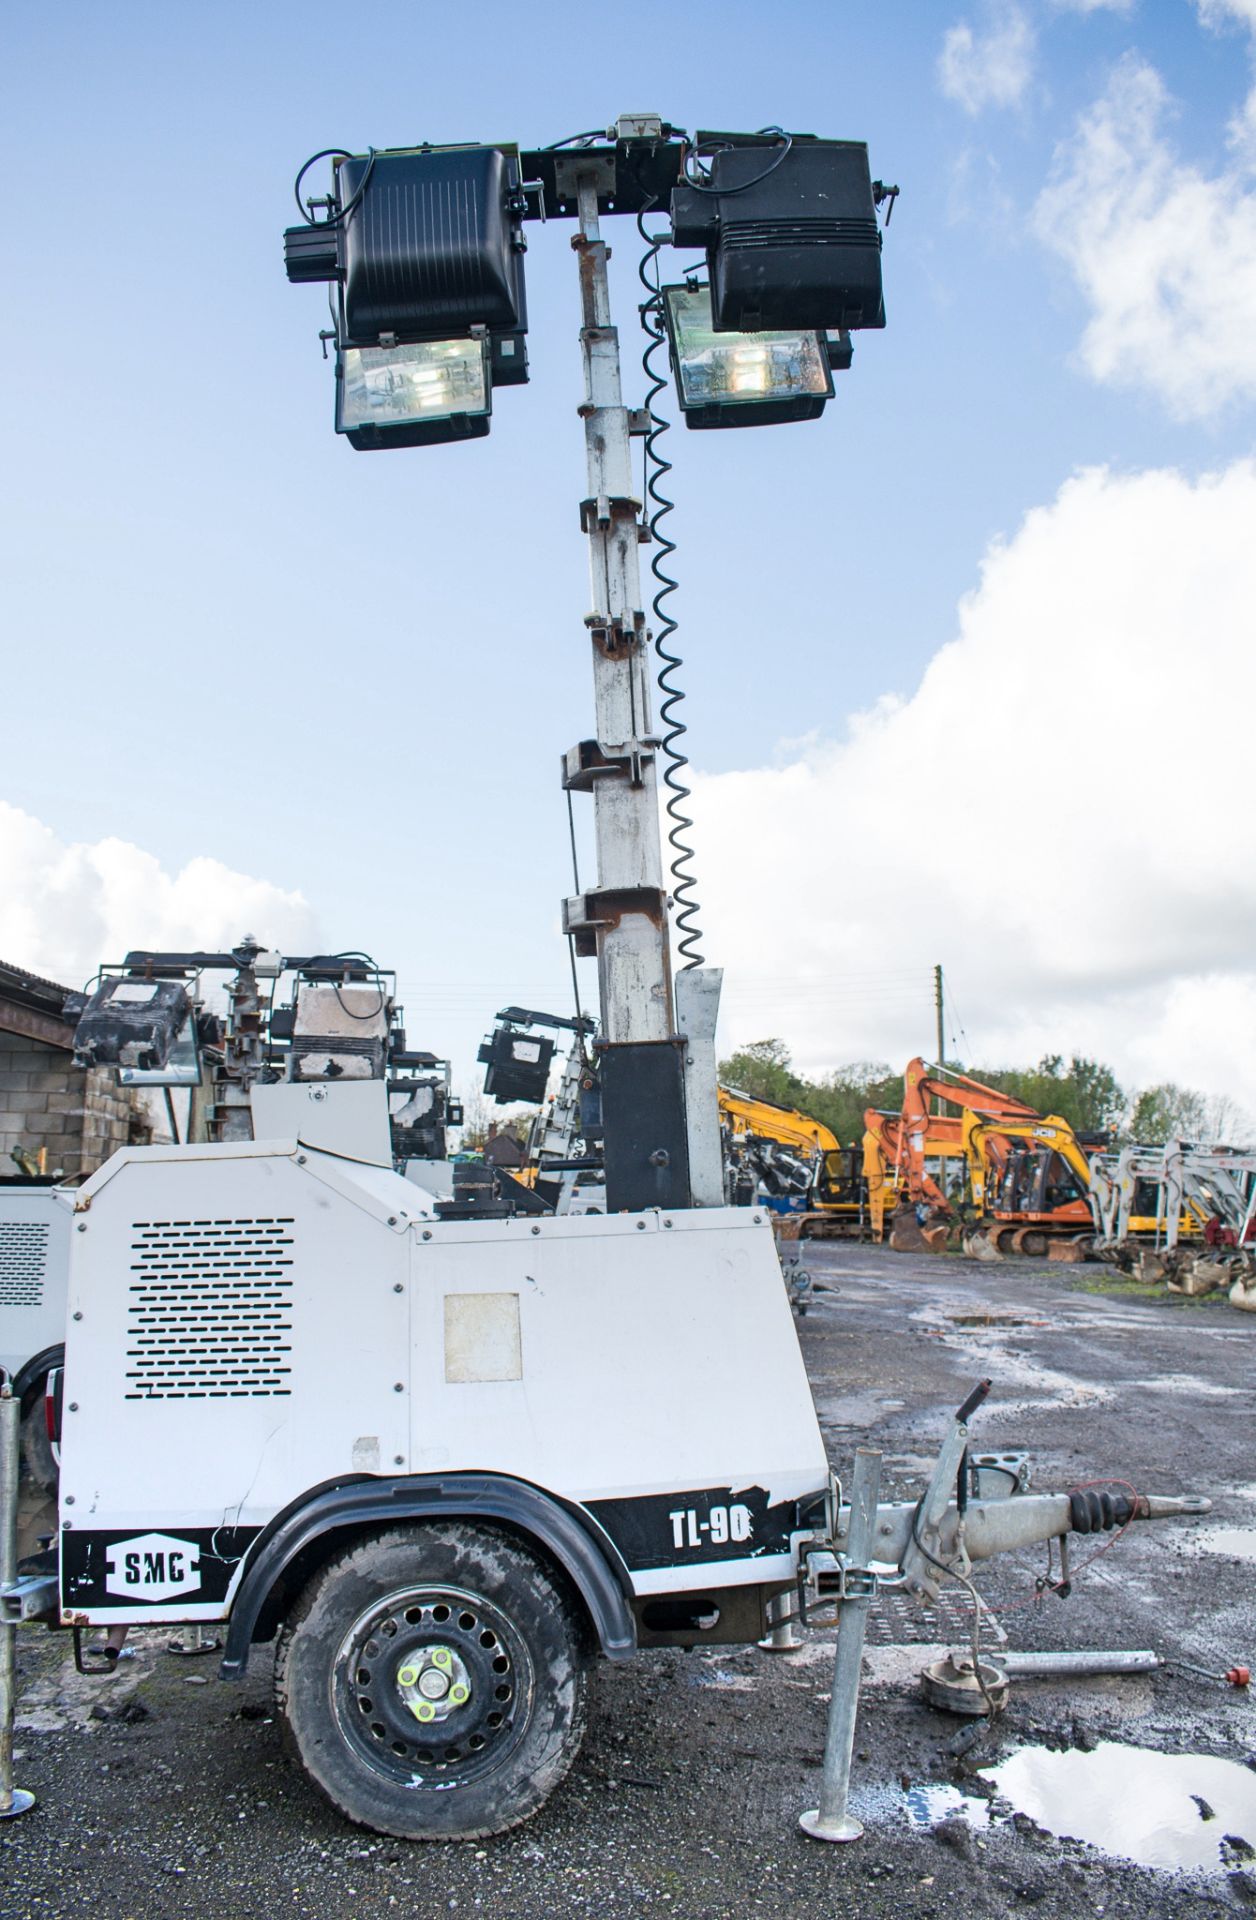 SMC TL-90 diesel driven mobile lighting tower  Year: 2012 S/N: 129401 Recorded hours: 4612 R380160 - Image 6 of 8